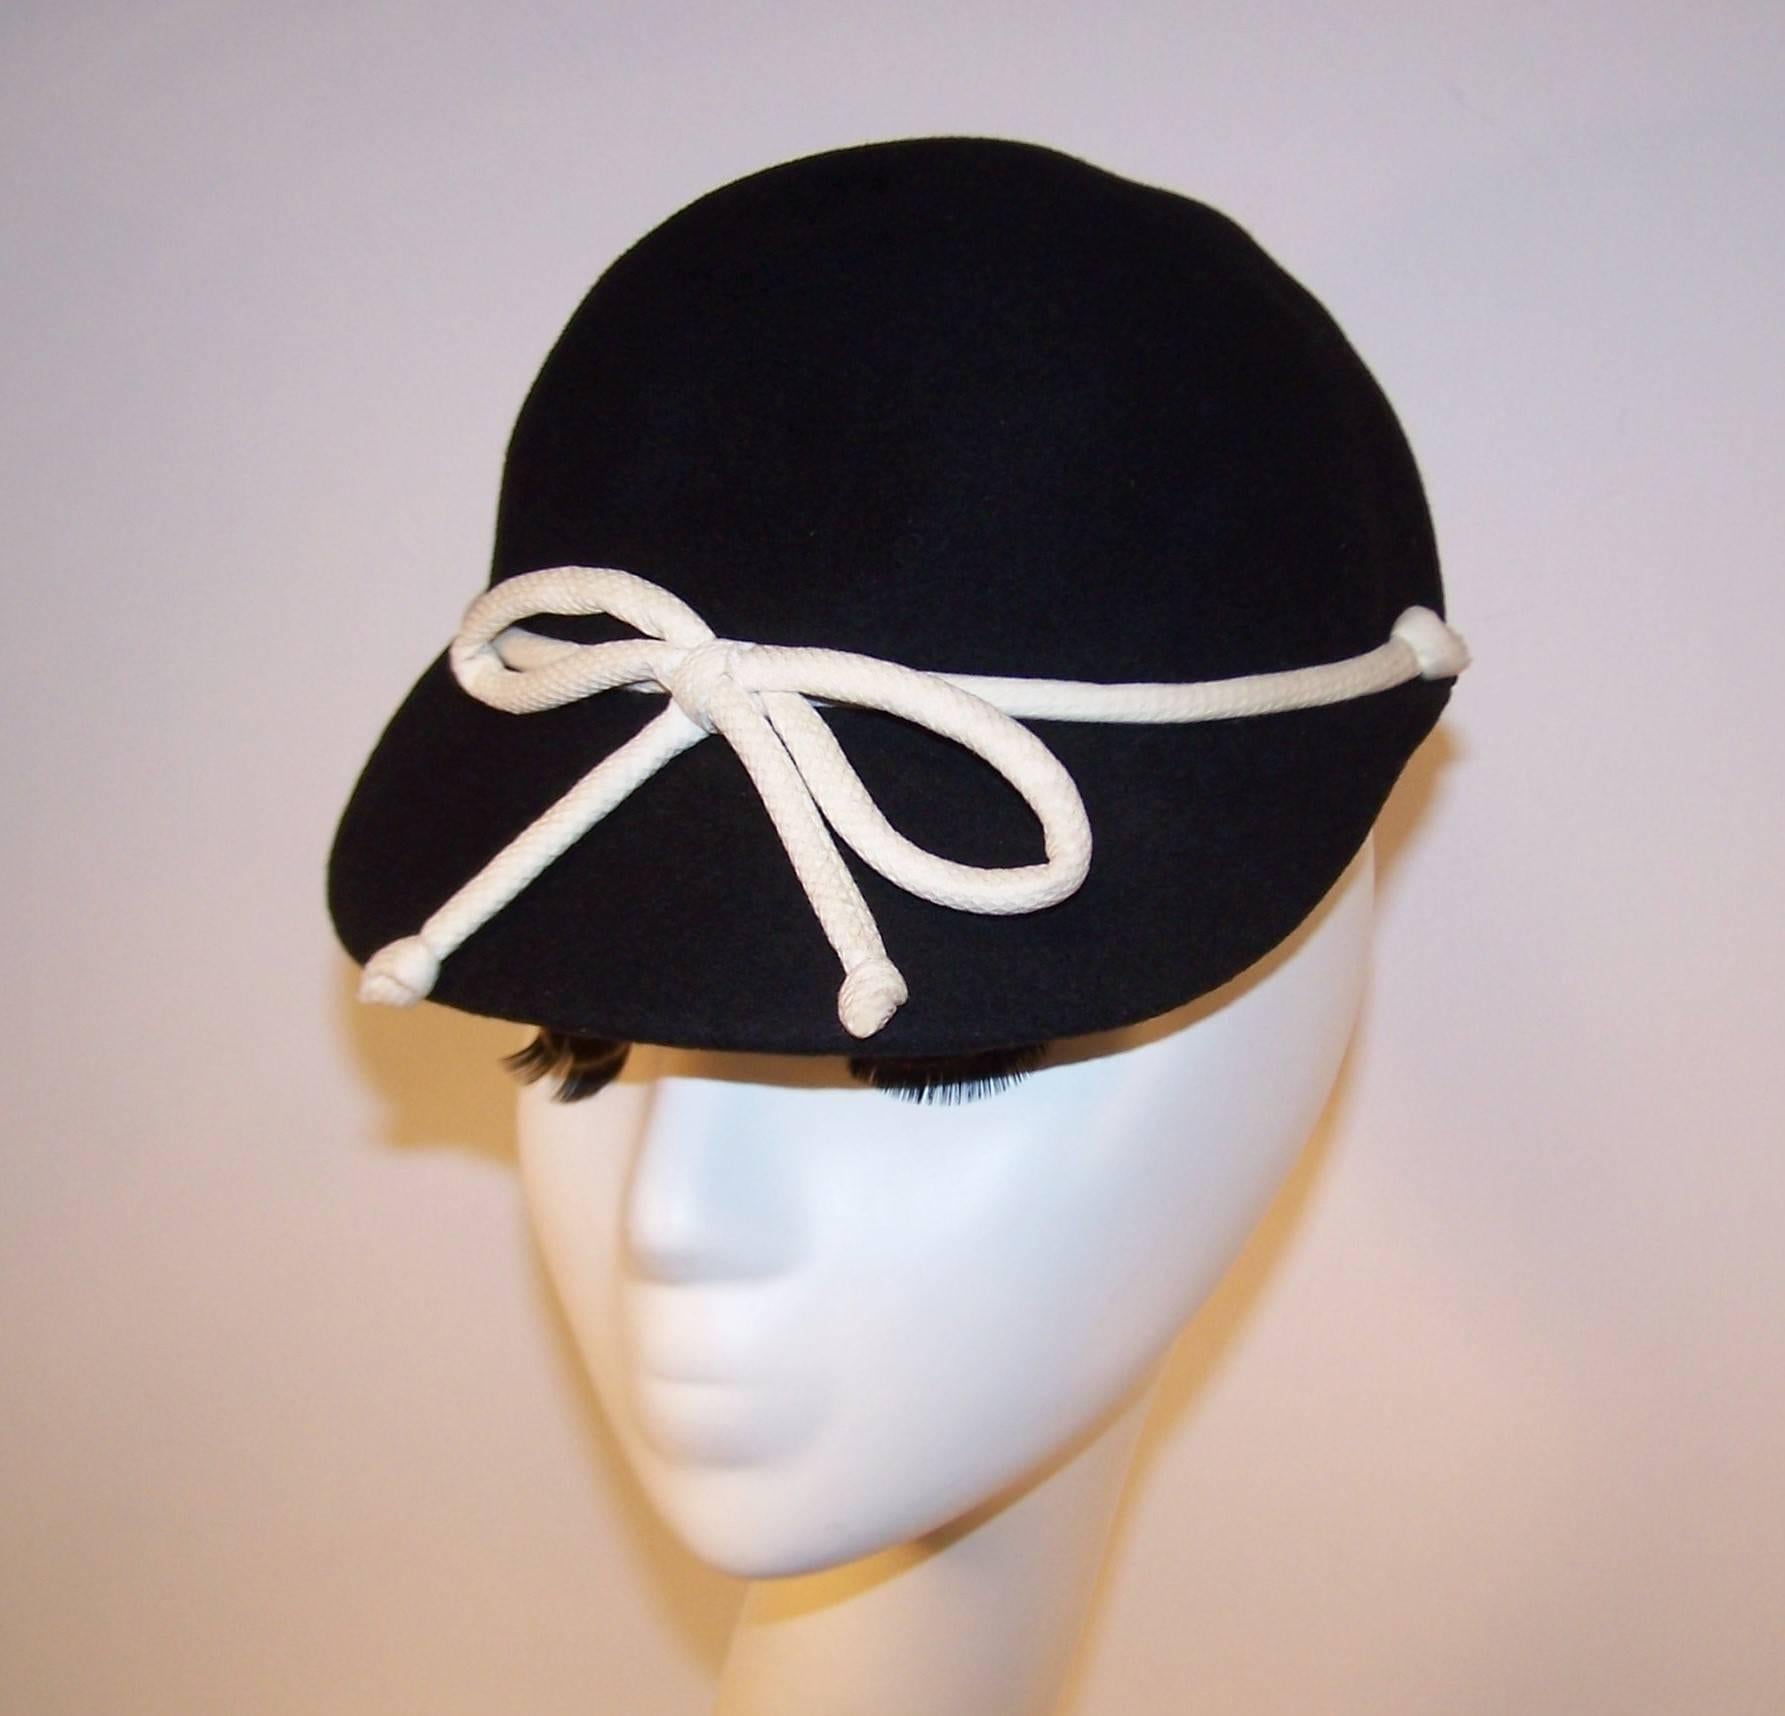 This adorable 1960's topper by Henry Pollak has a sporty style somewhere between a riding hat and an old fashioned ball cap.  The black wool body is embellished with an off white cotton pique bow lending the hat a Springtime vibe perfect for warm